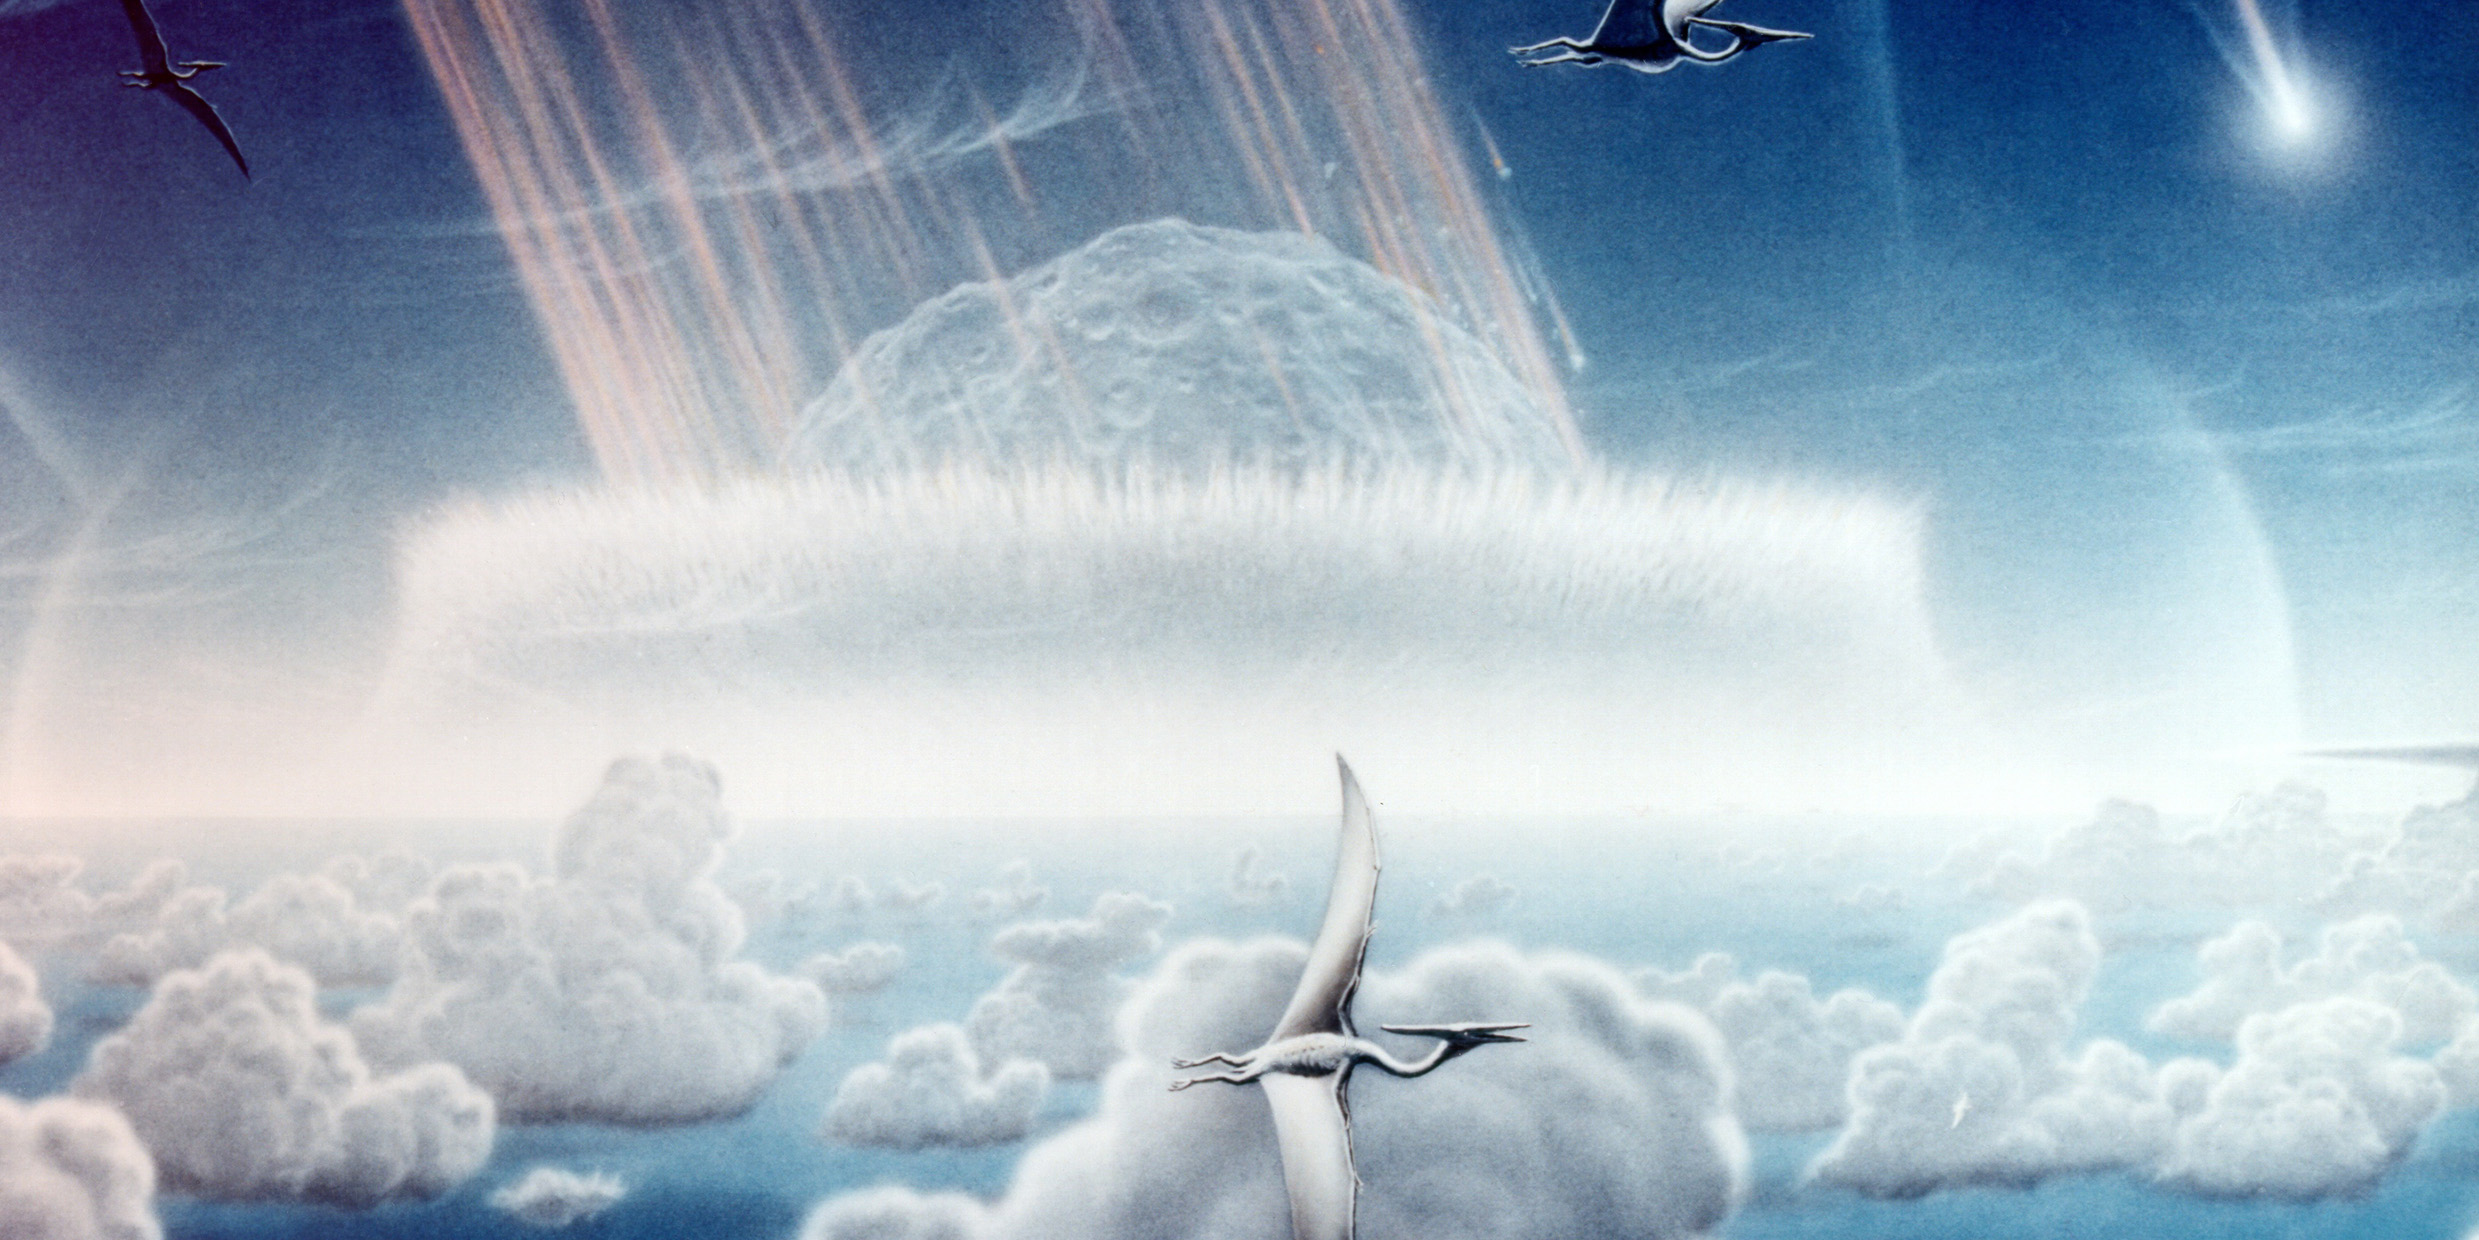 Artist's impression of asteroid impact